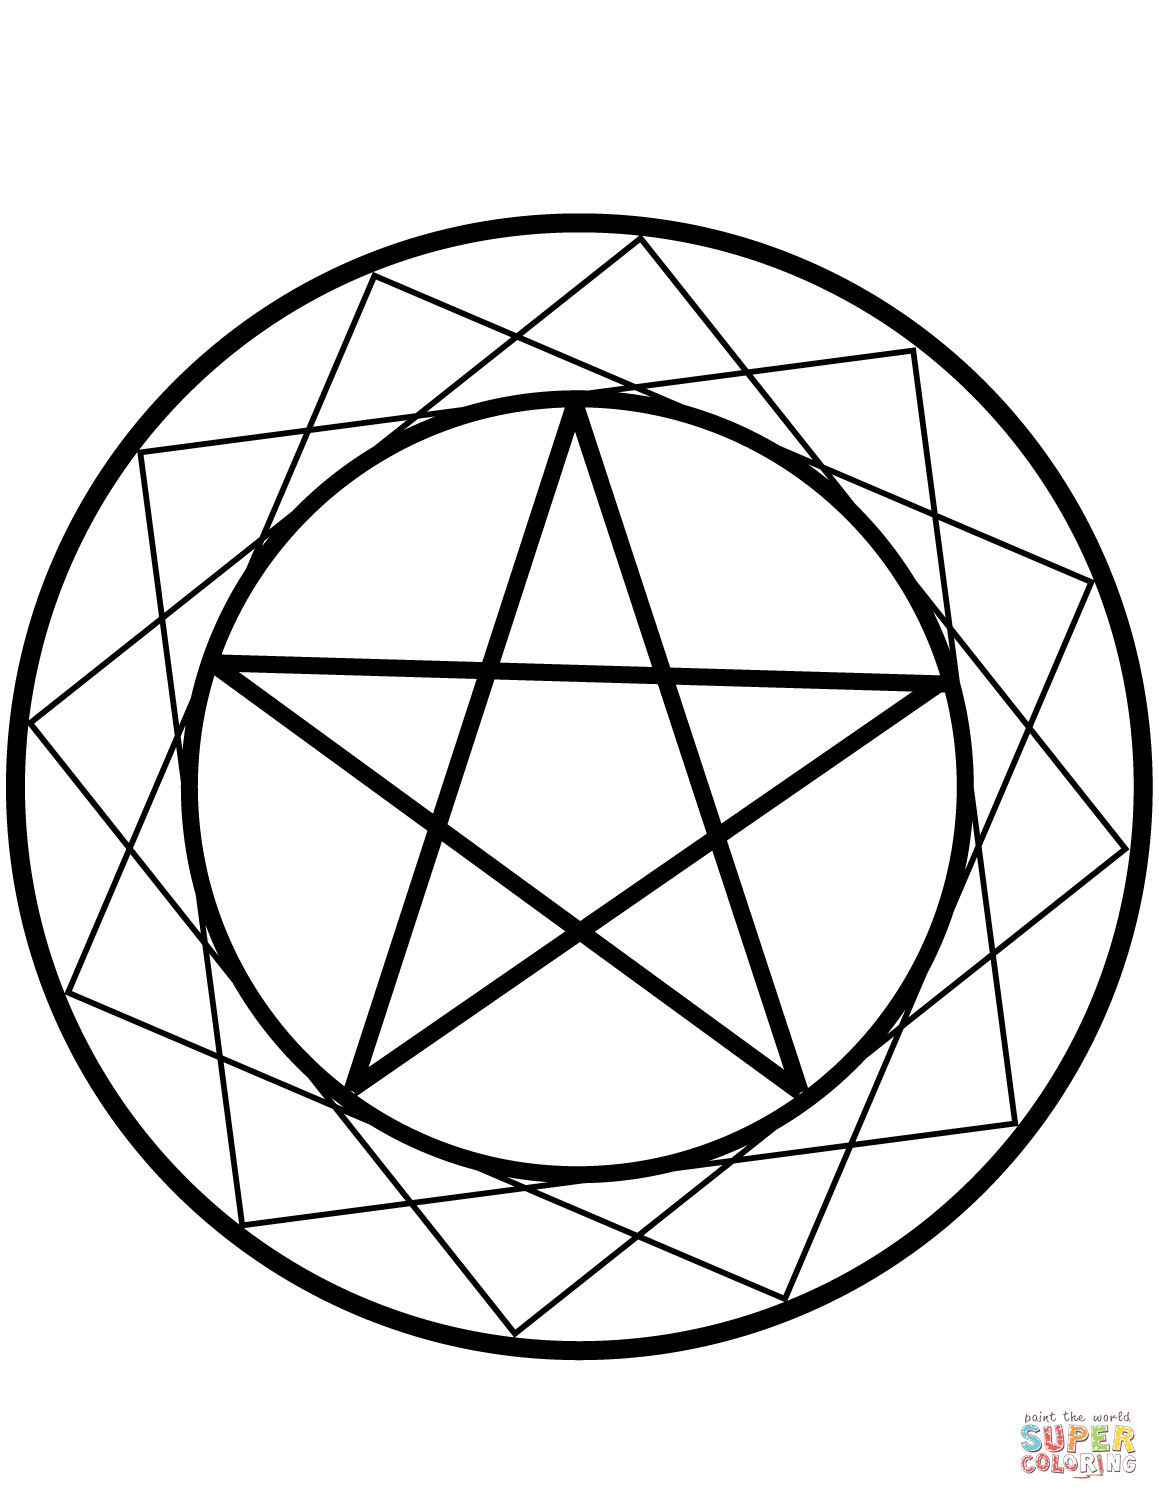 Printable Wiccan Coloring Pages
 Wiccan Pentacle coloring page